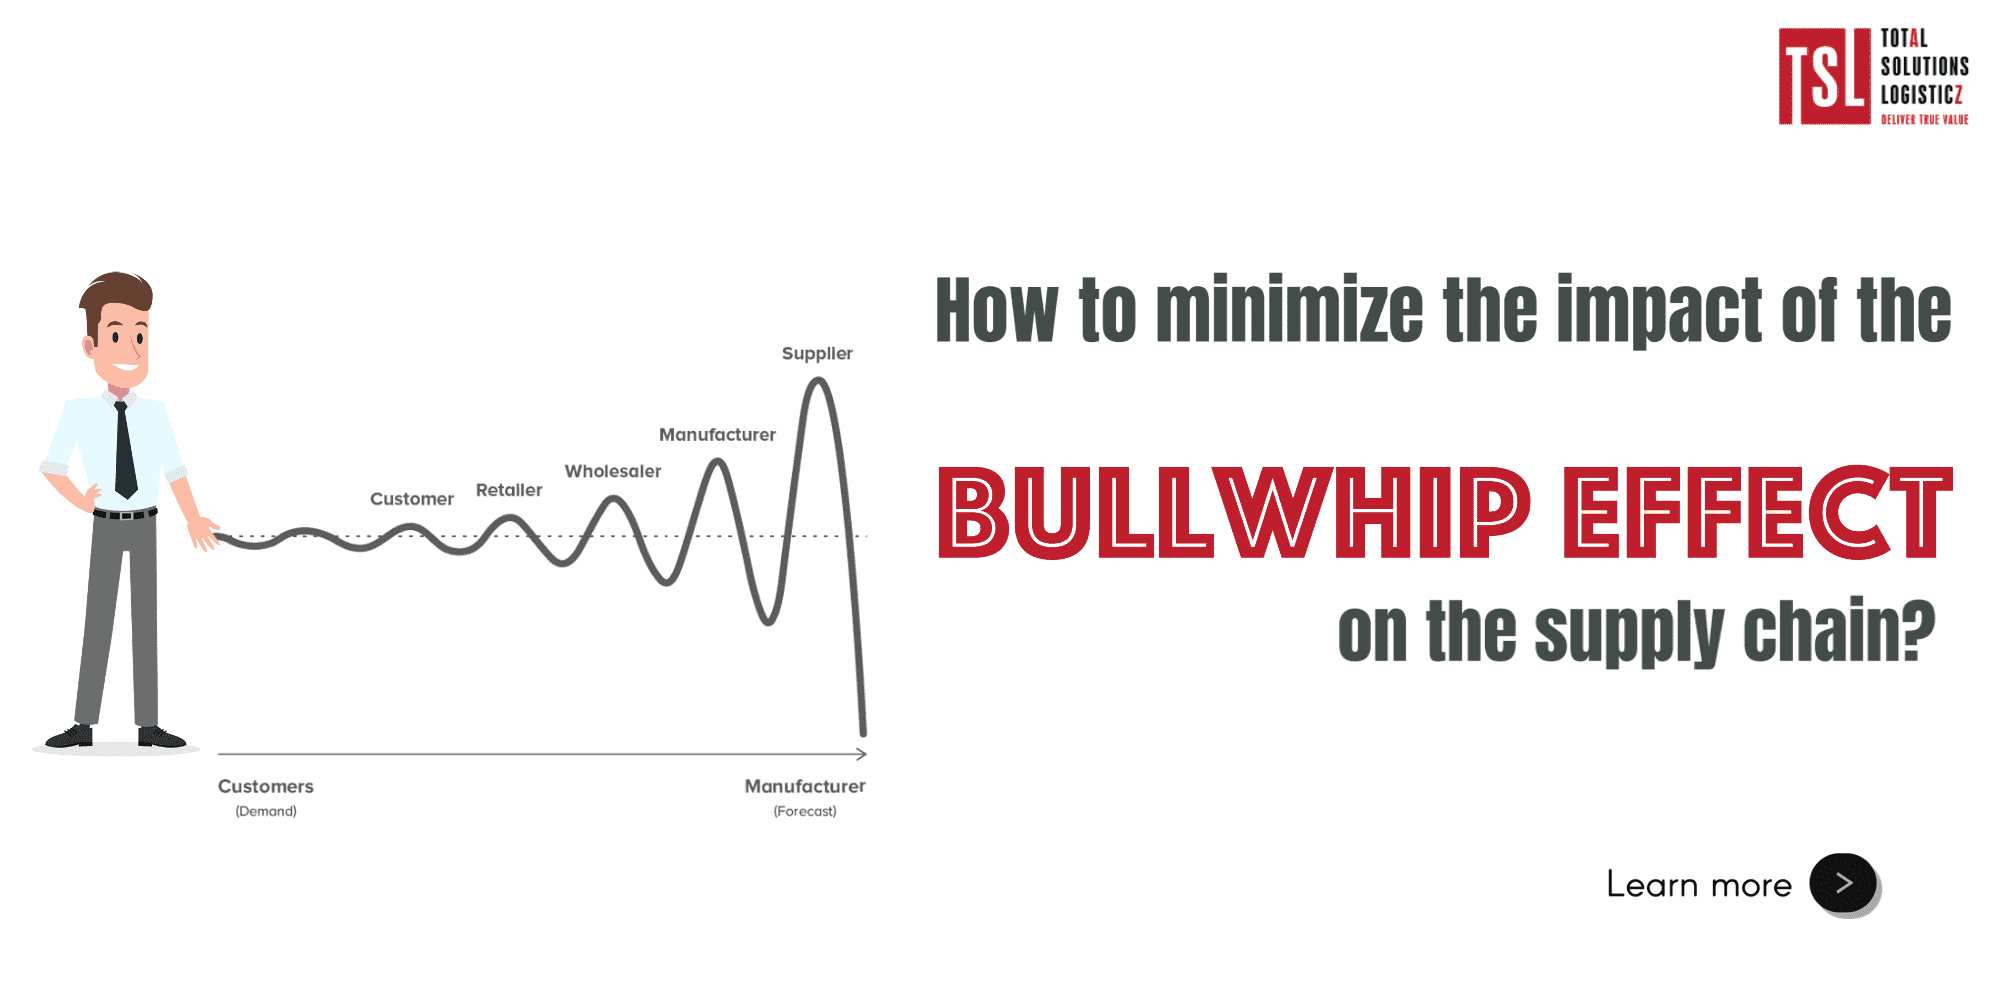 How to minimize the impact of the Bullwhip effect on the supply chain?